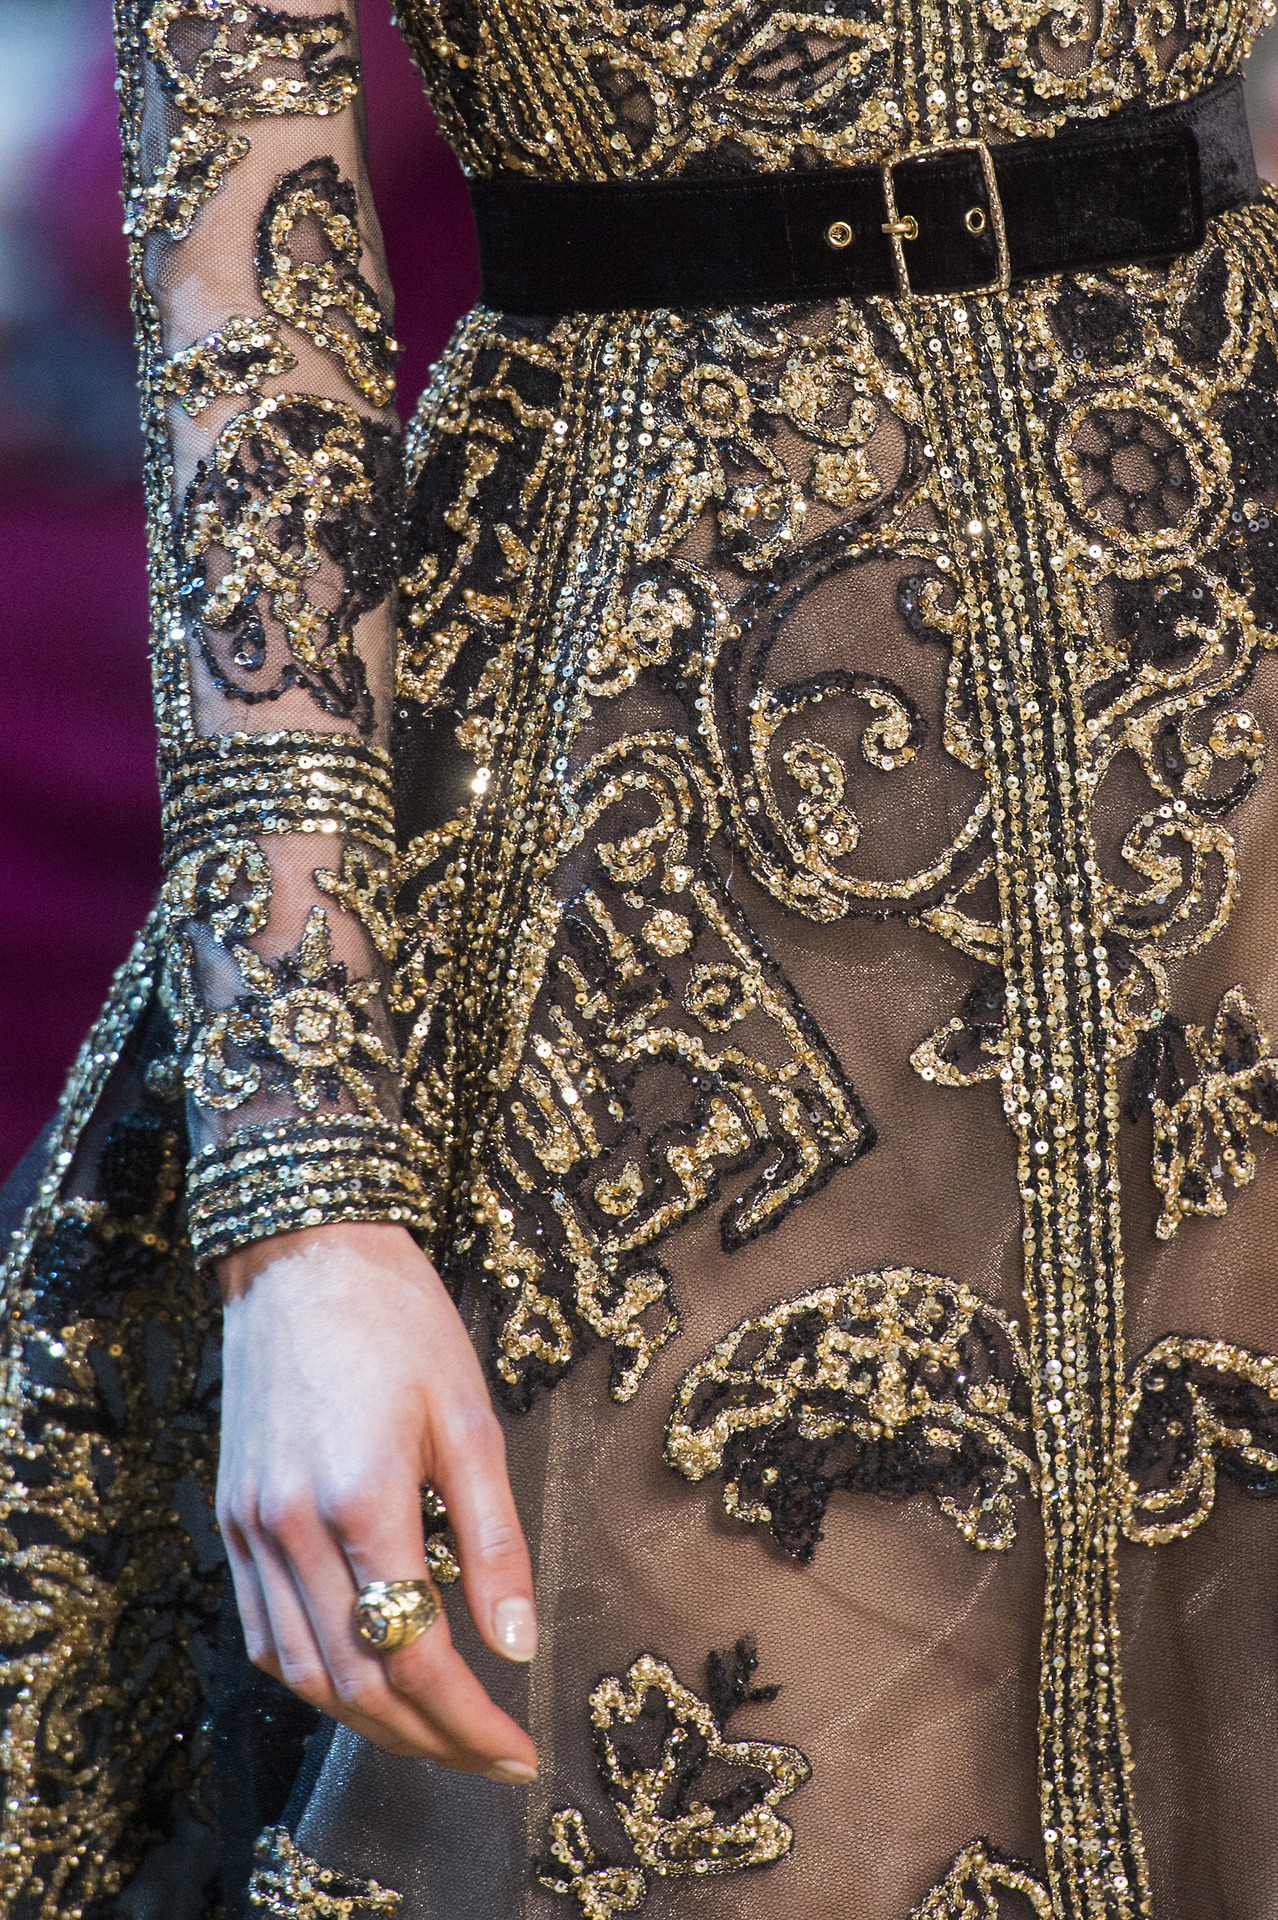 And my reign will be pink — juilletdeux: Elie Saab | Fall/Winter 2017 ...